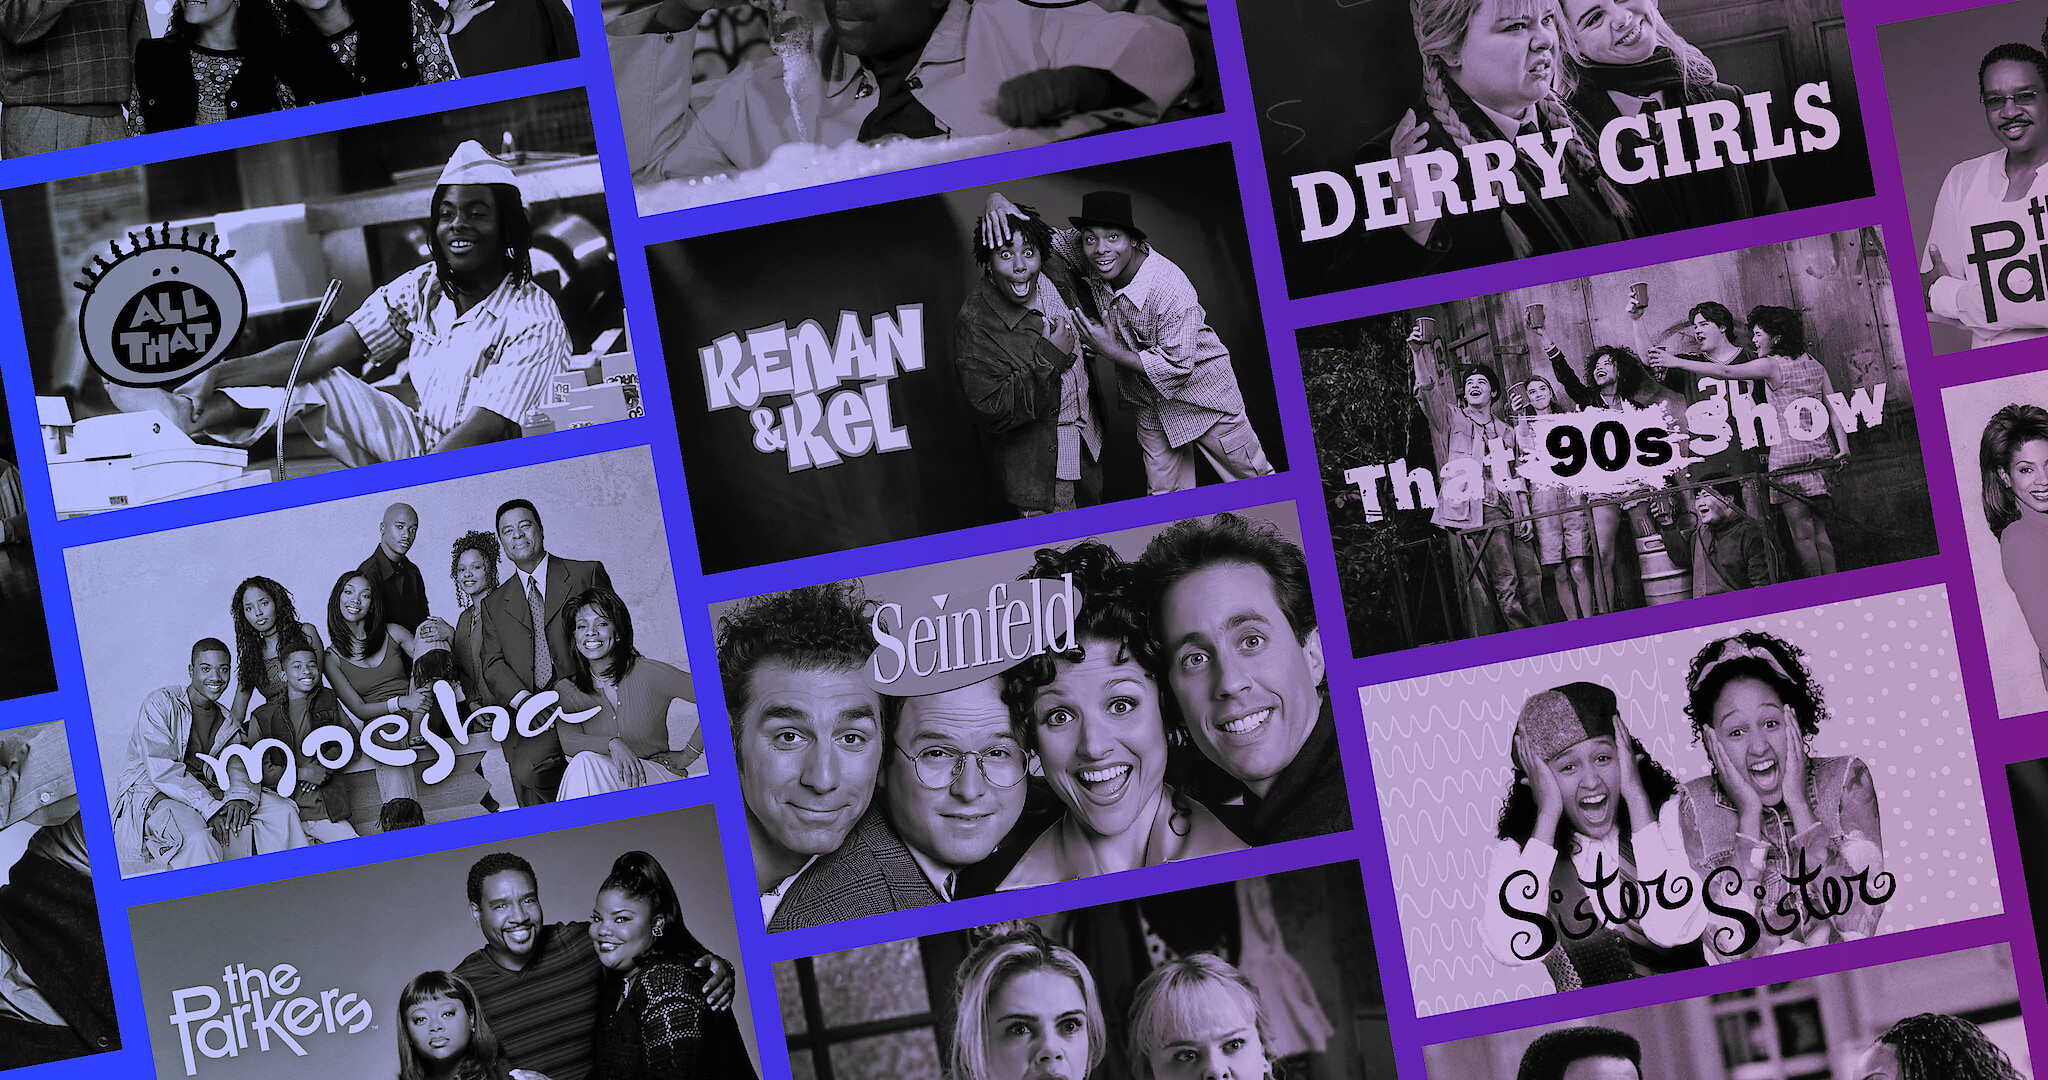 8 Best 90s TV Shows to Watch That are All That